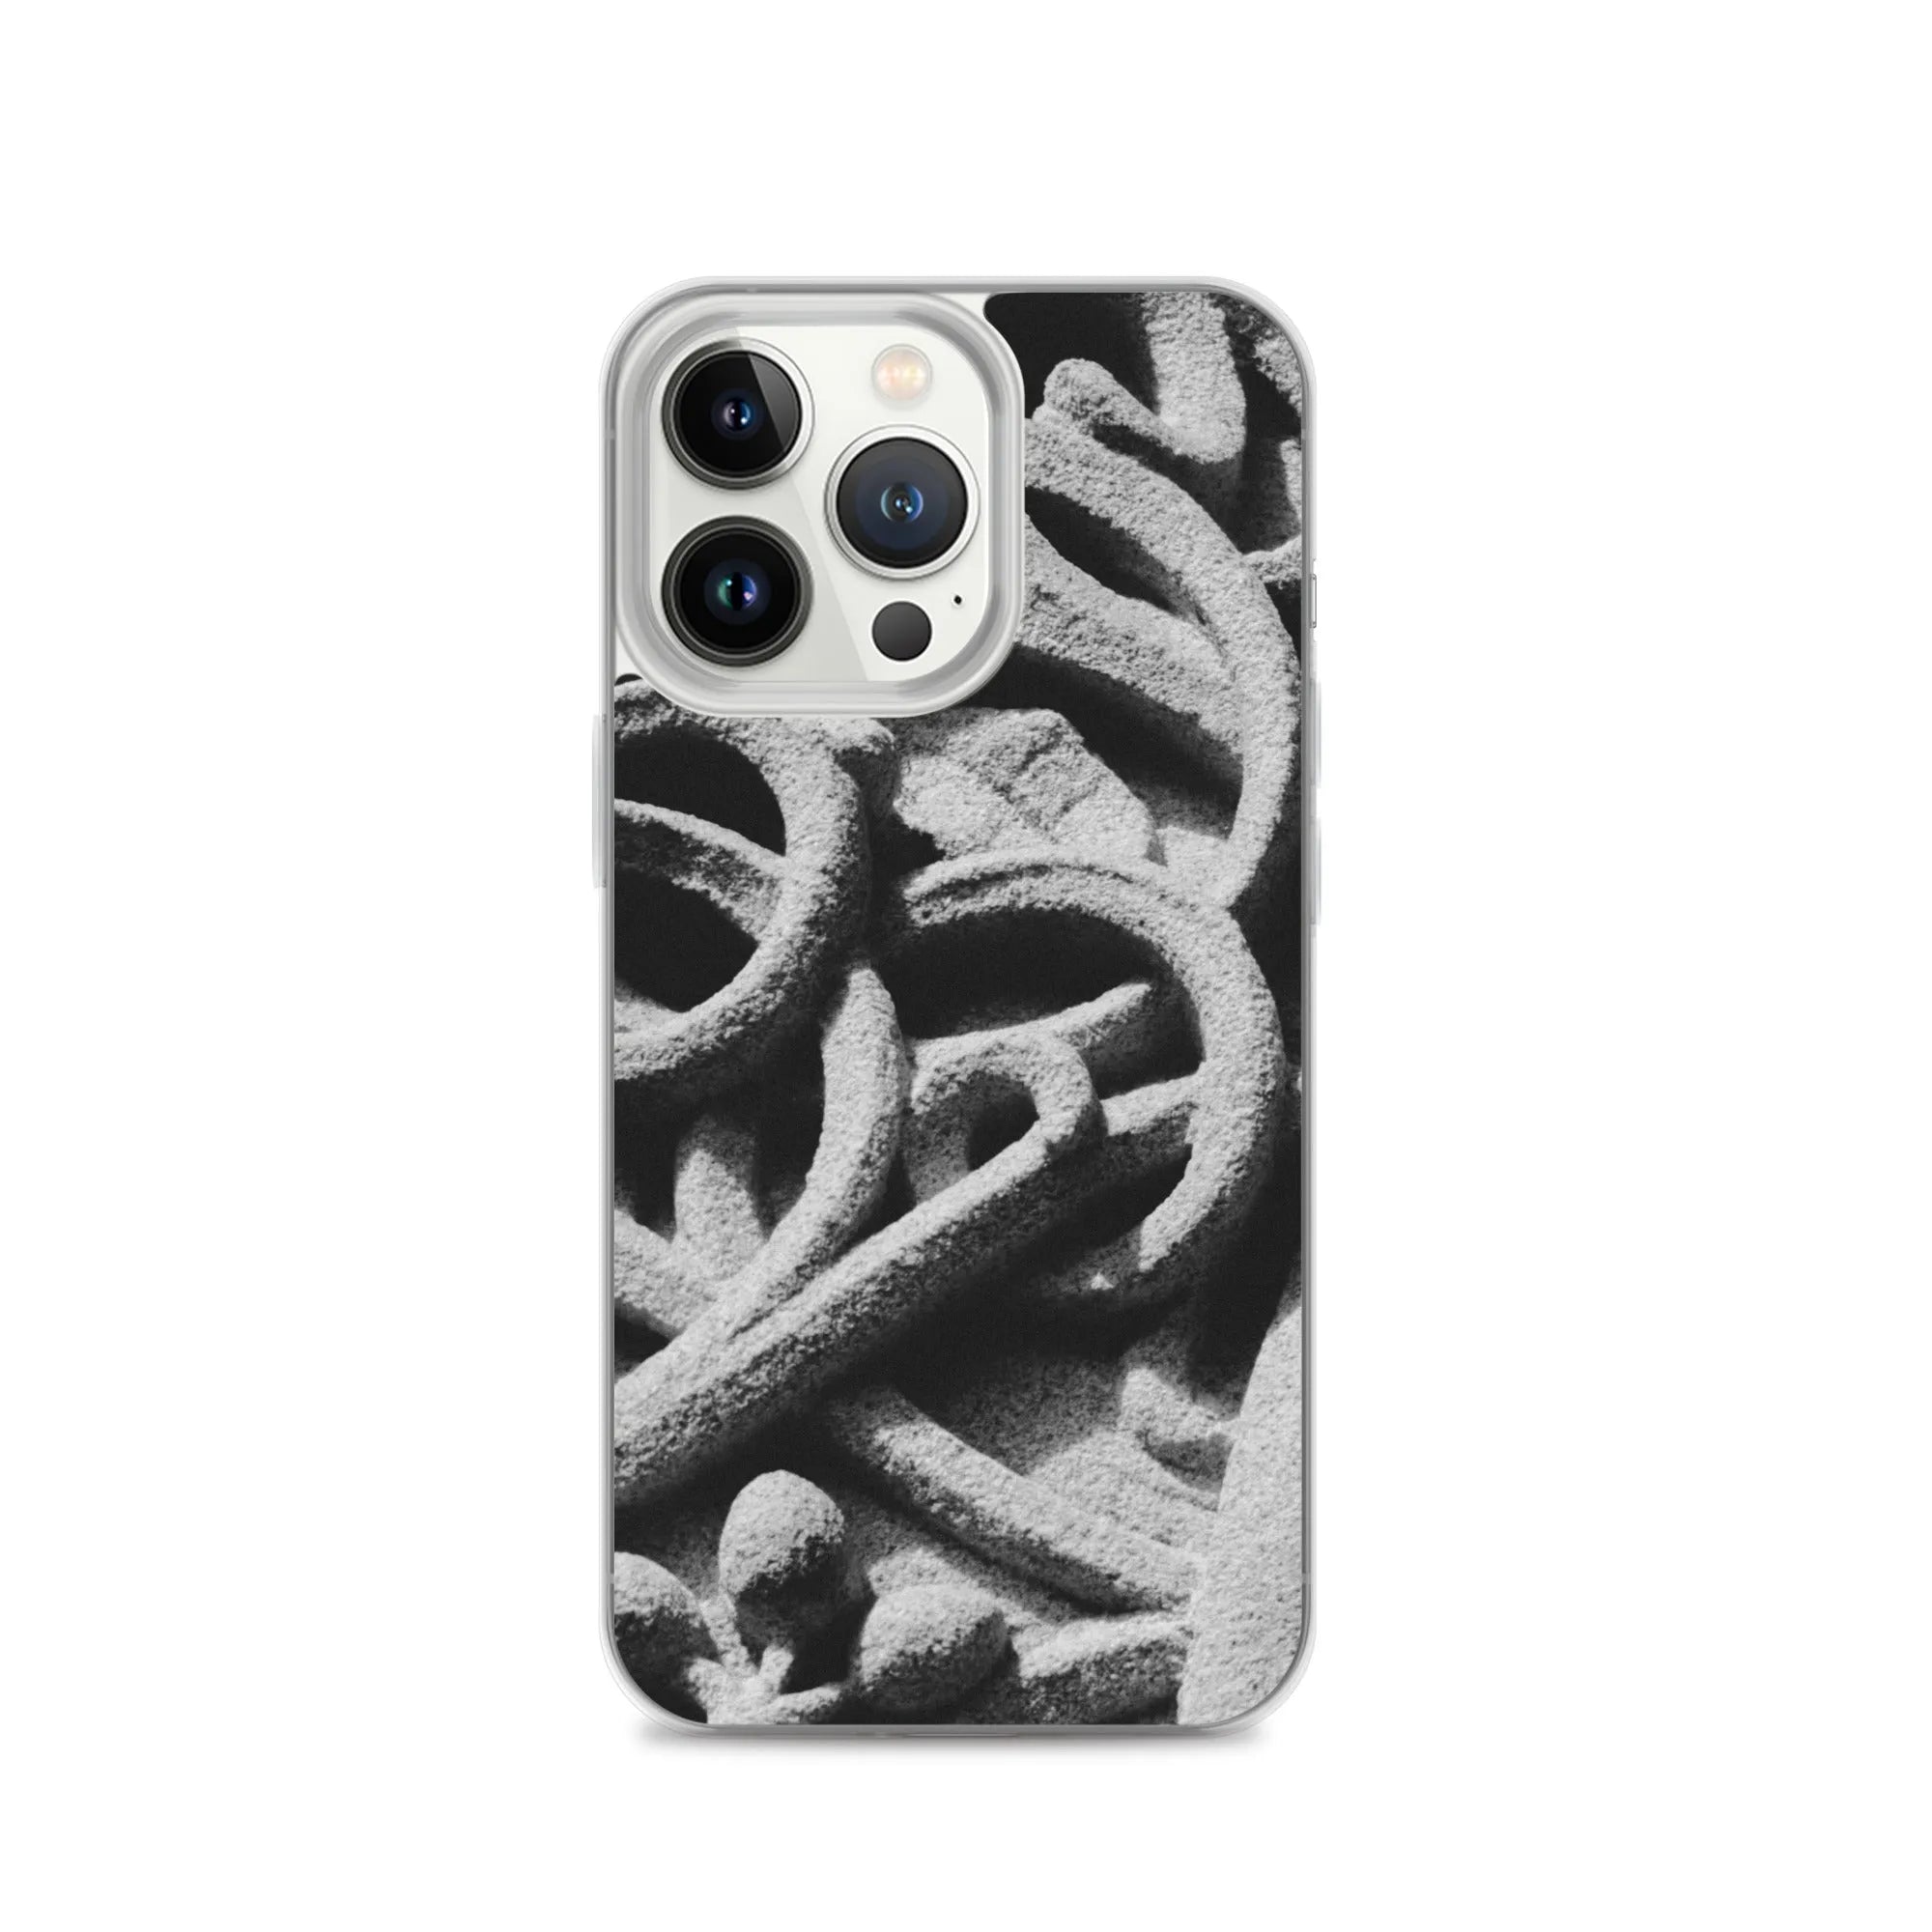 Labyrinth - Designer Travels Art Iphone Case - Black And White - Iphone 13 Pro - Mobile Phone Cases - Aesthetic Art